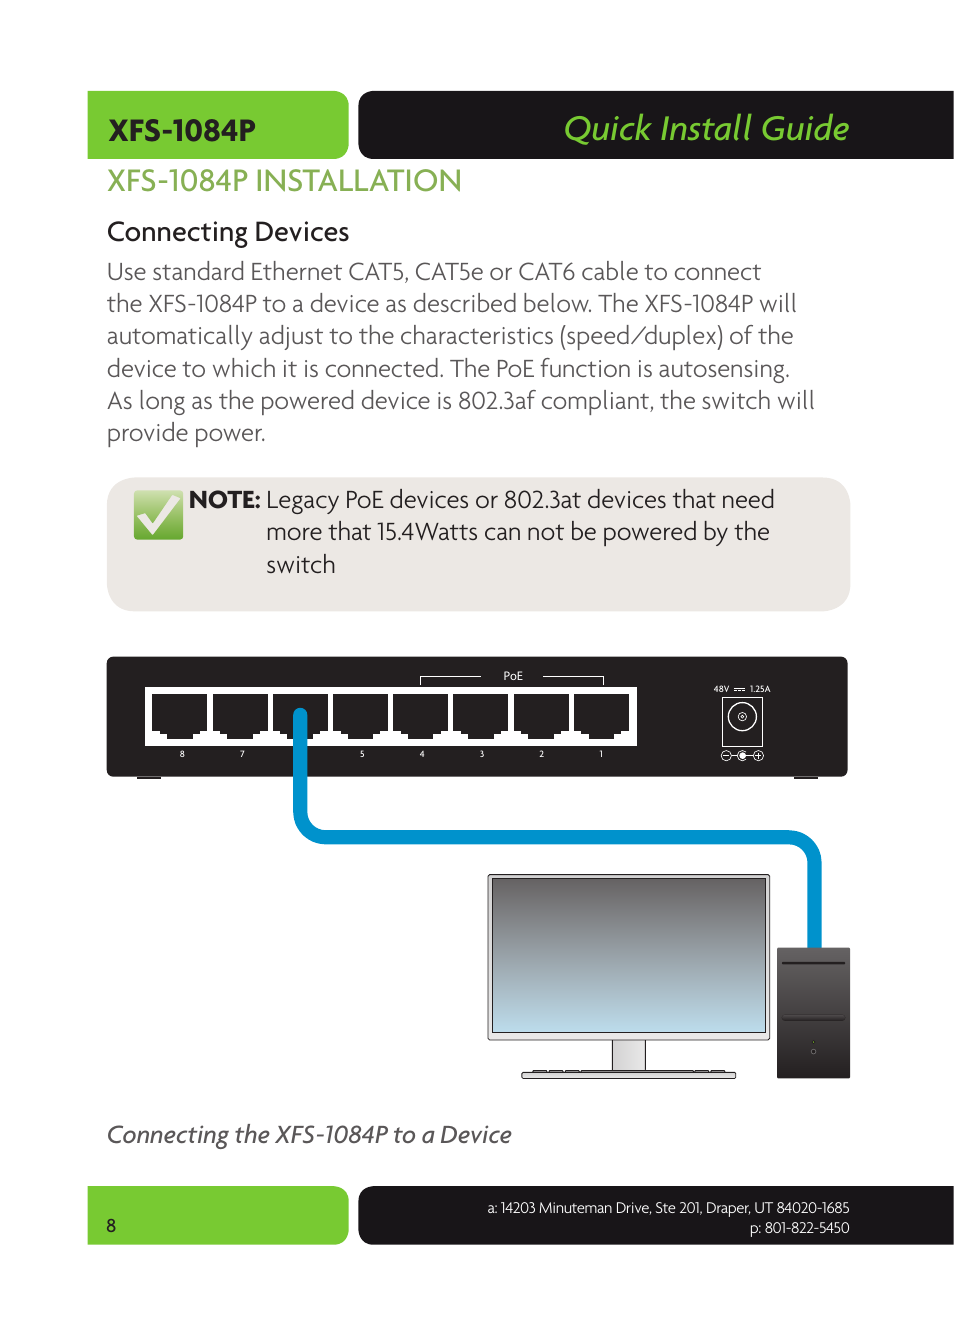 Quick install guide, Connecting devices, Connecting the xfs-1084p to a device | Luxul XFS-1084P User Manual | Page 8 / 10